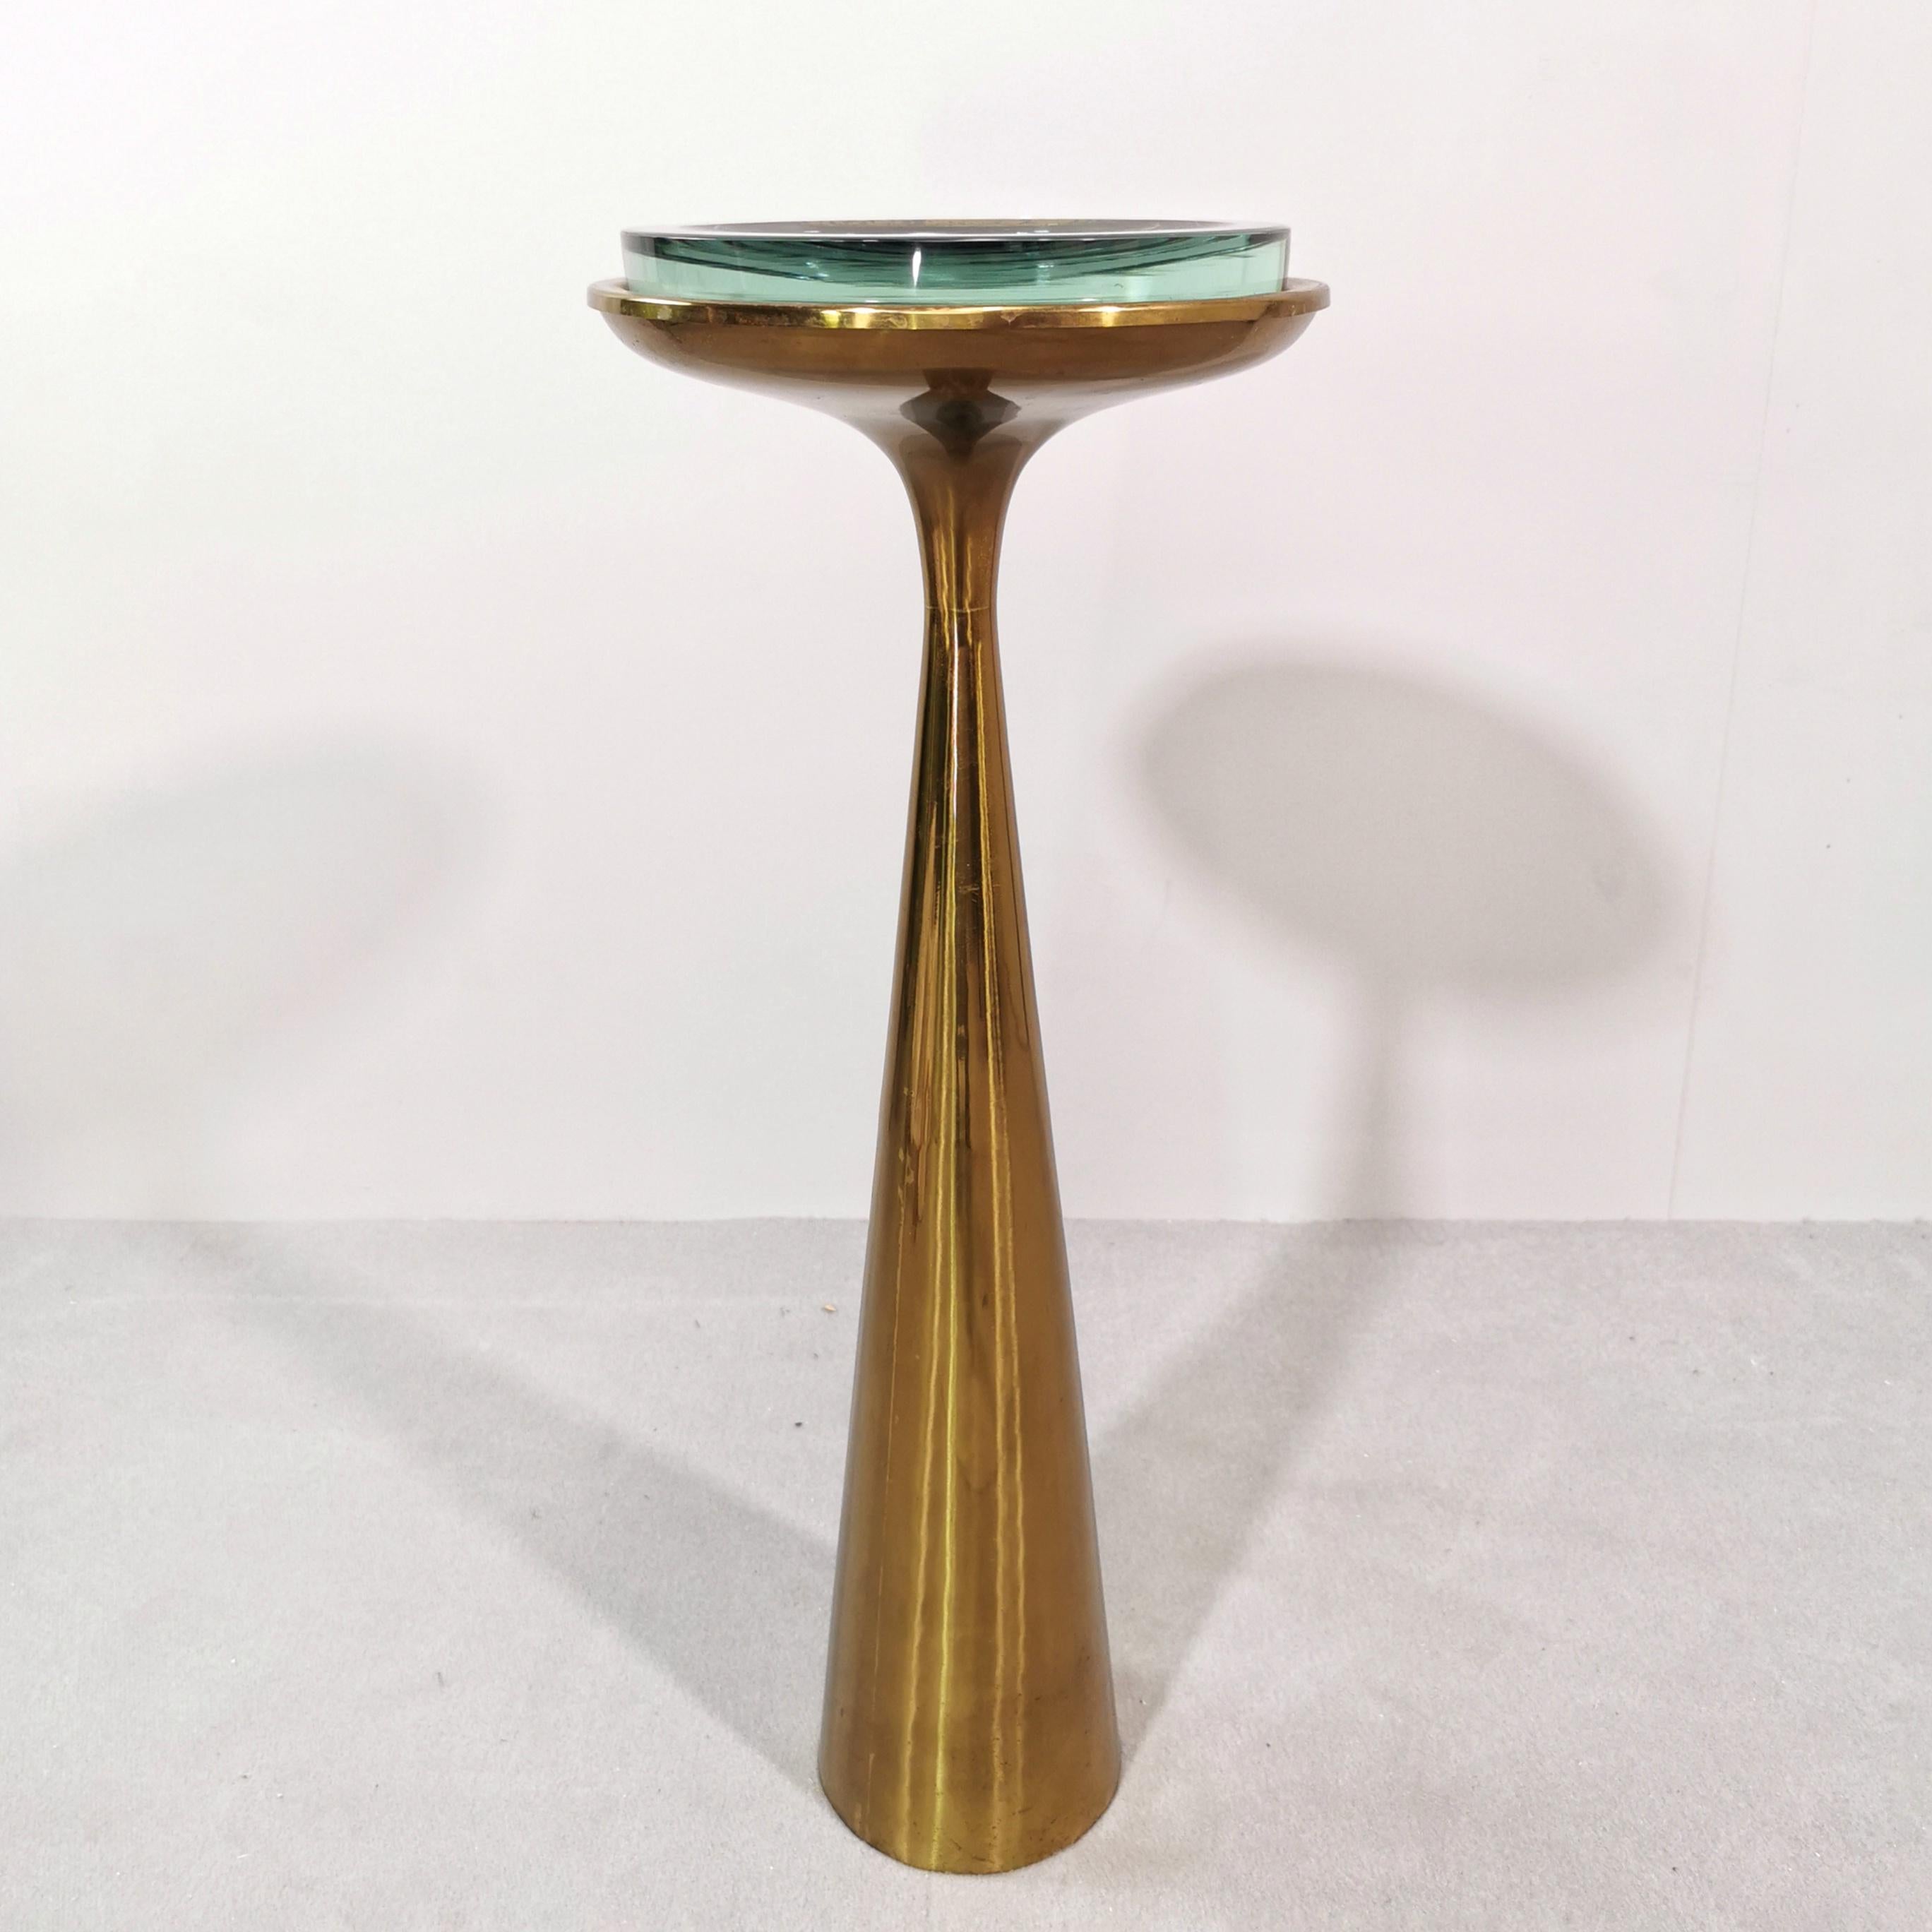 Rare Ashtray Table mod.1176 designed by Max Ingrand for Fontana Arte in the 1960s.
The conical brass structure about 65 cm high is in very good condition with no special marks 
fontanaarte glass plate is in perfect condition
The mark is shown under